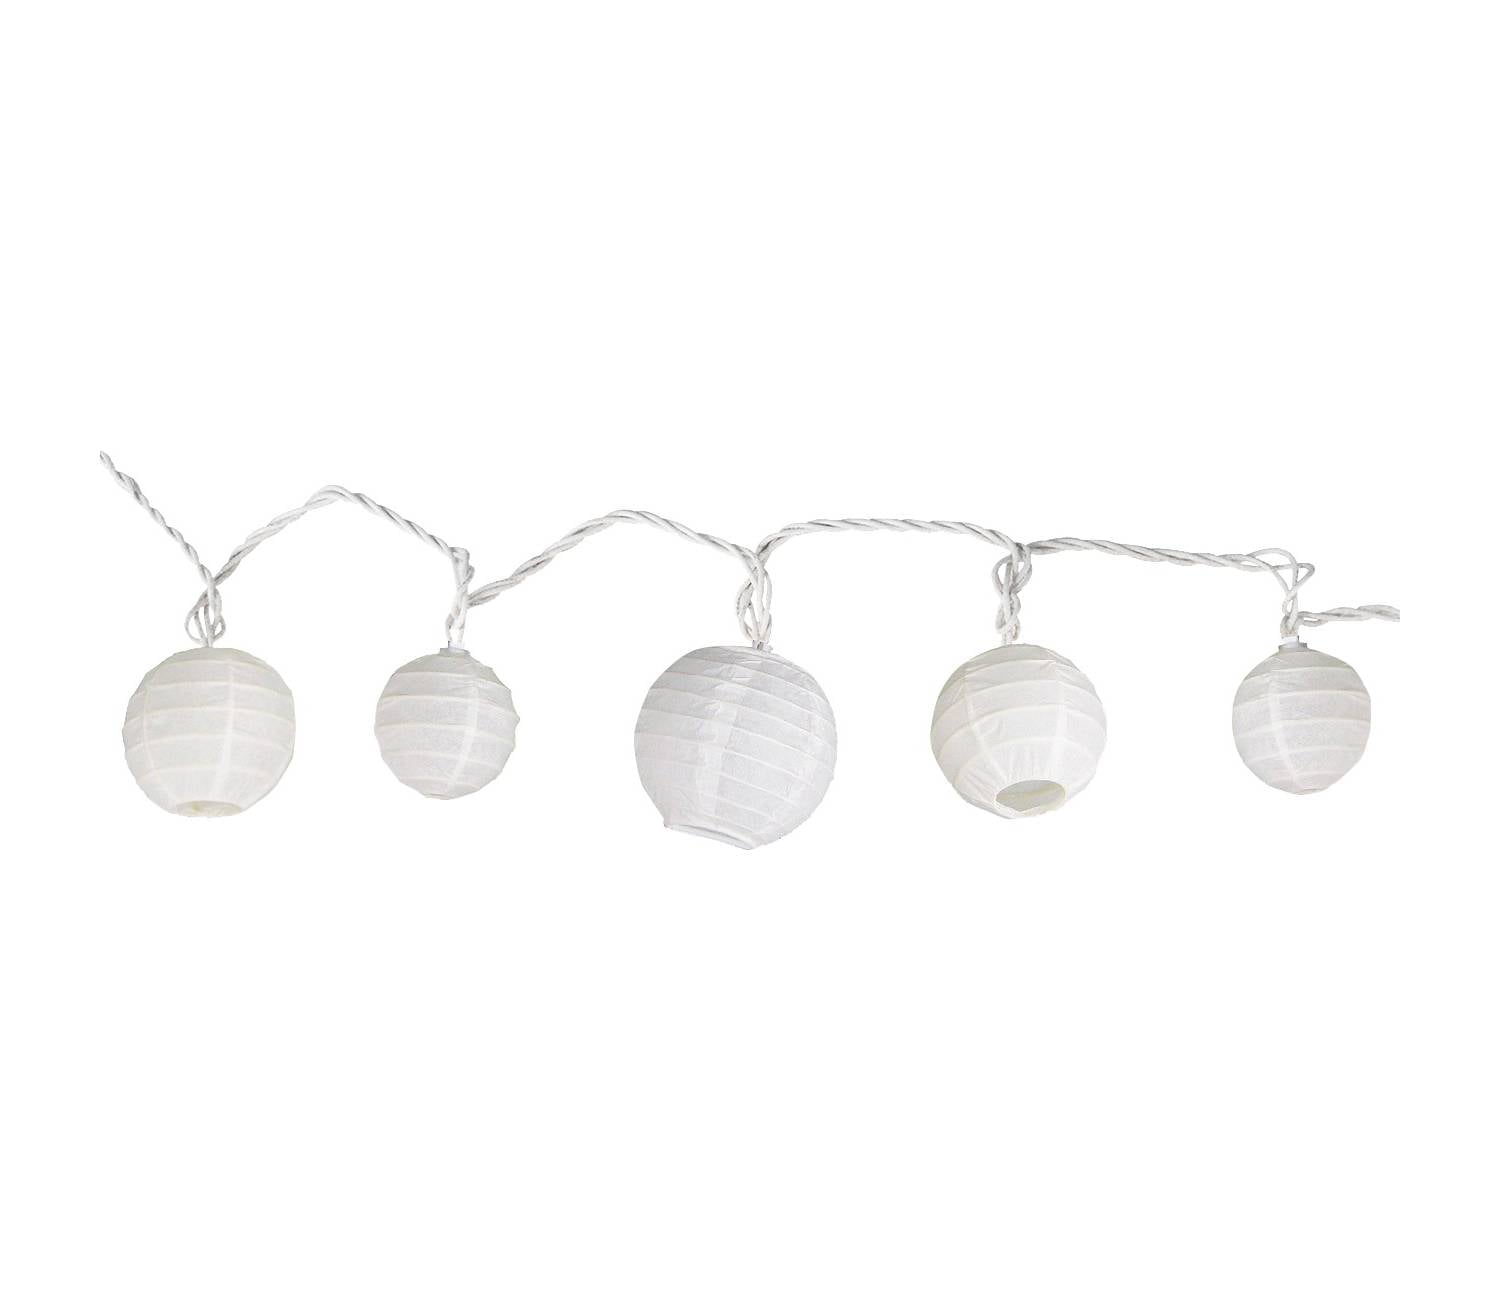 Room Essentials Multi Size Ball String Lights In White 15